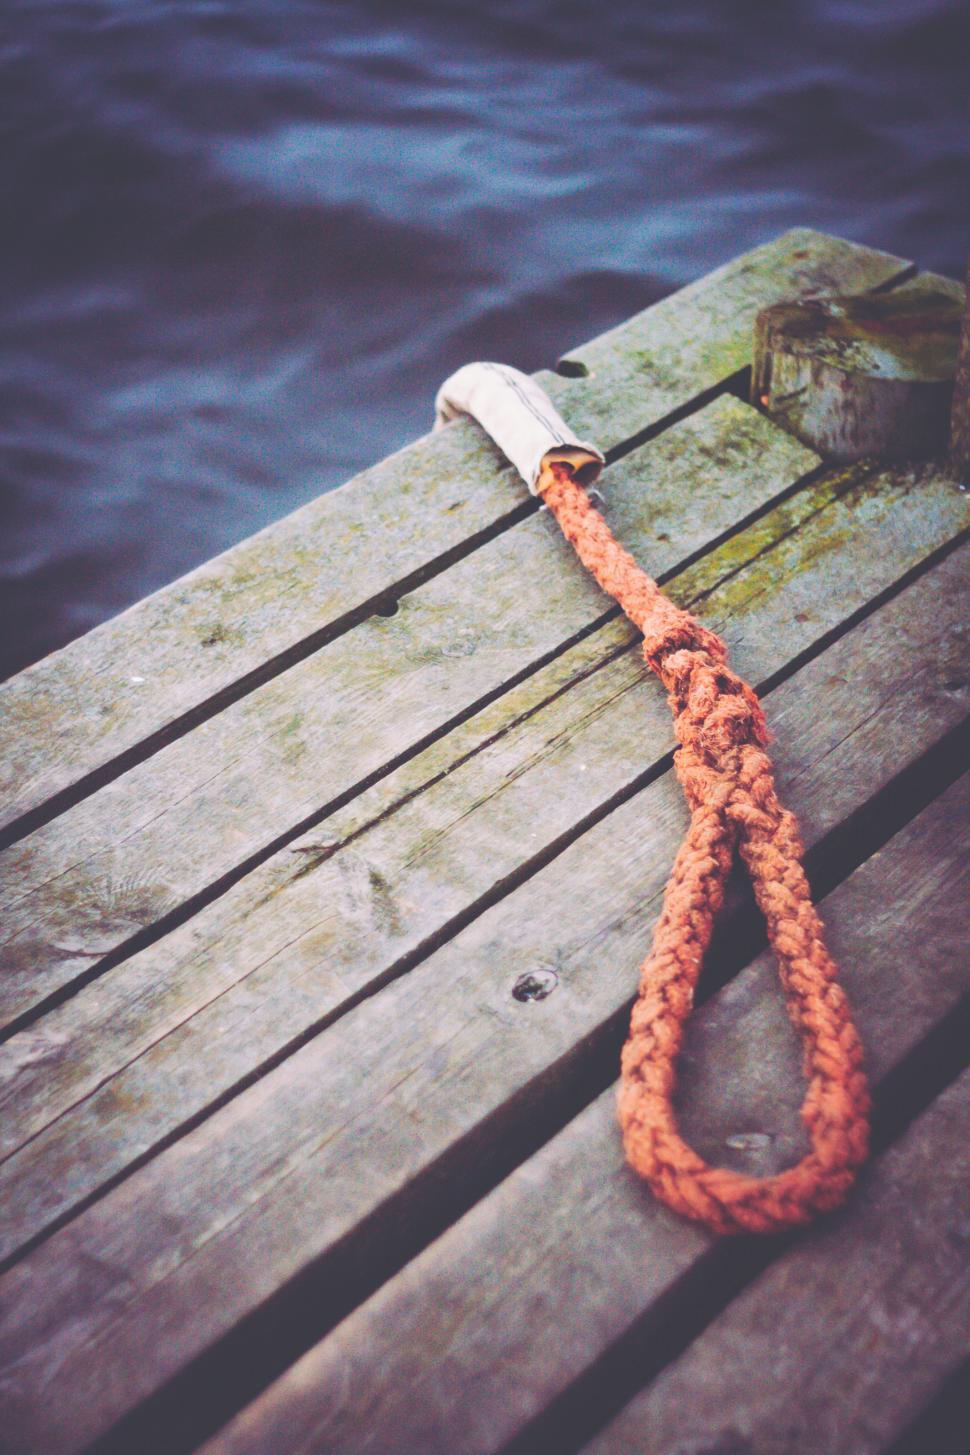 Free Image of Orange Rope Tied to Wooden Dock 